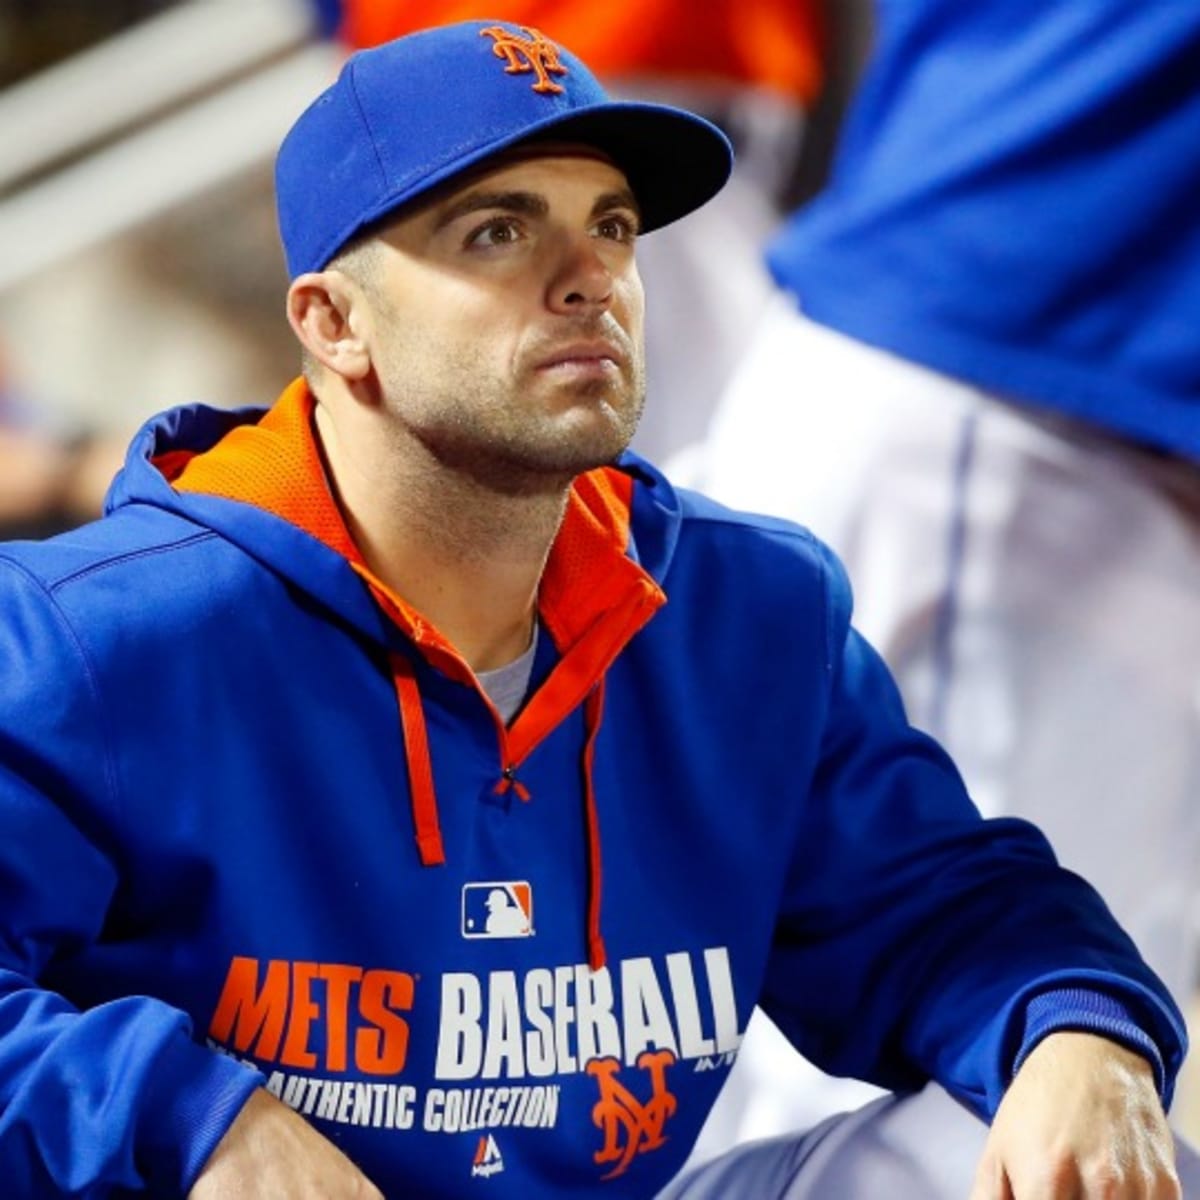 New York Mets' David Wright or Captain America: who said it